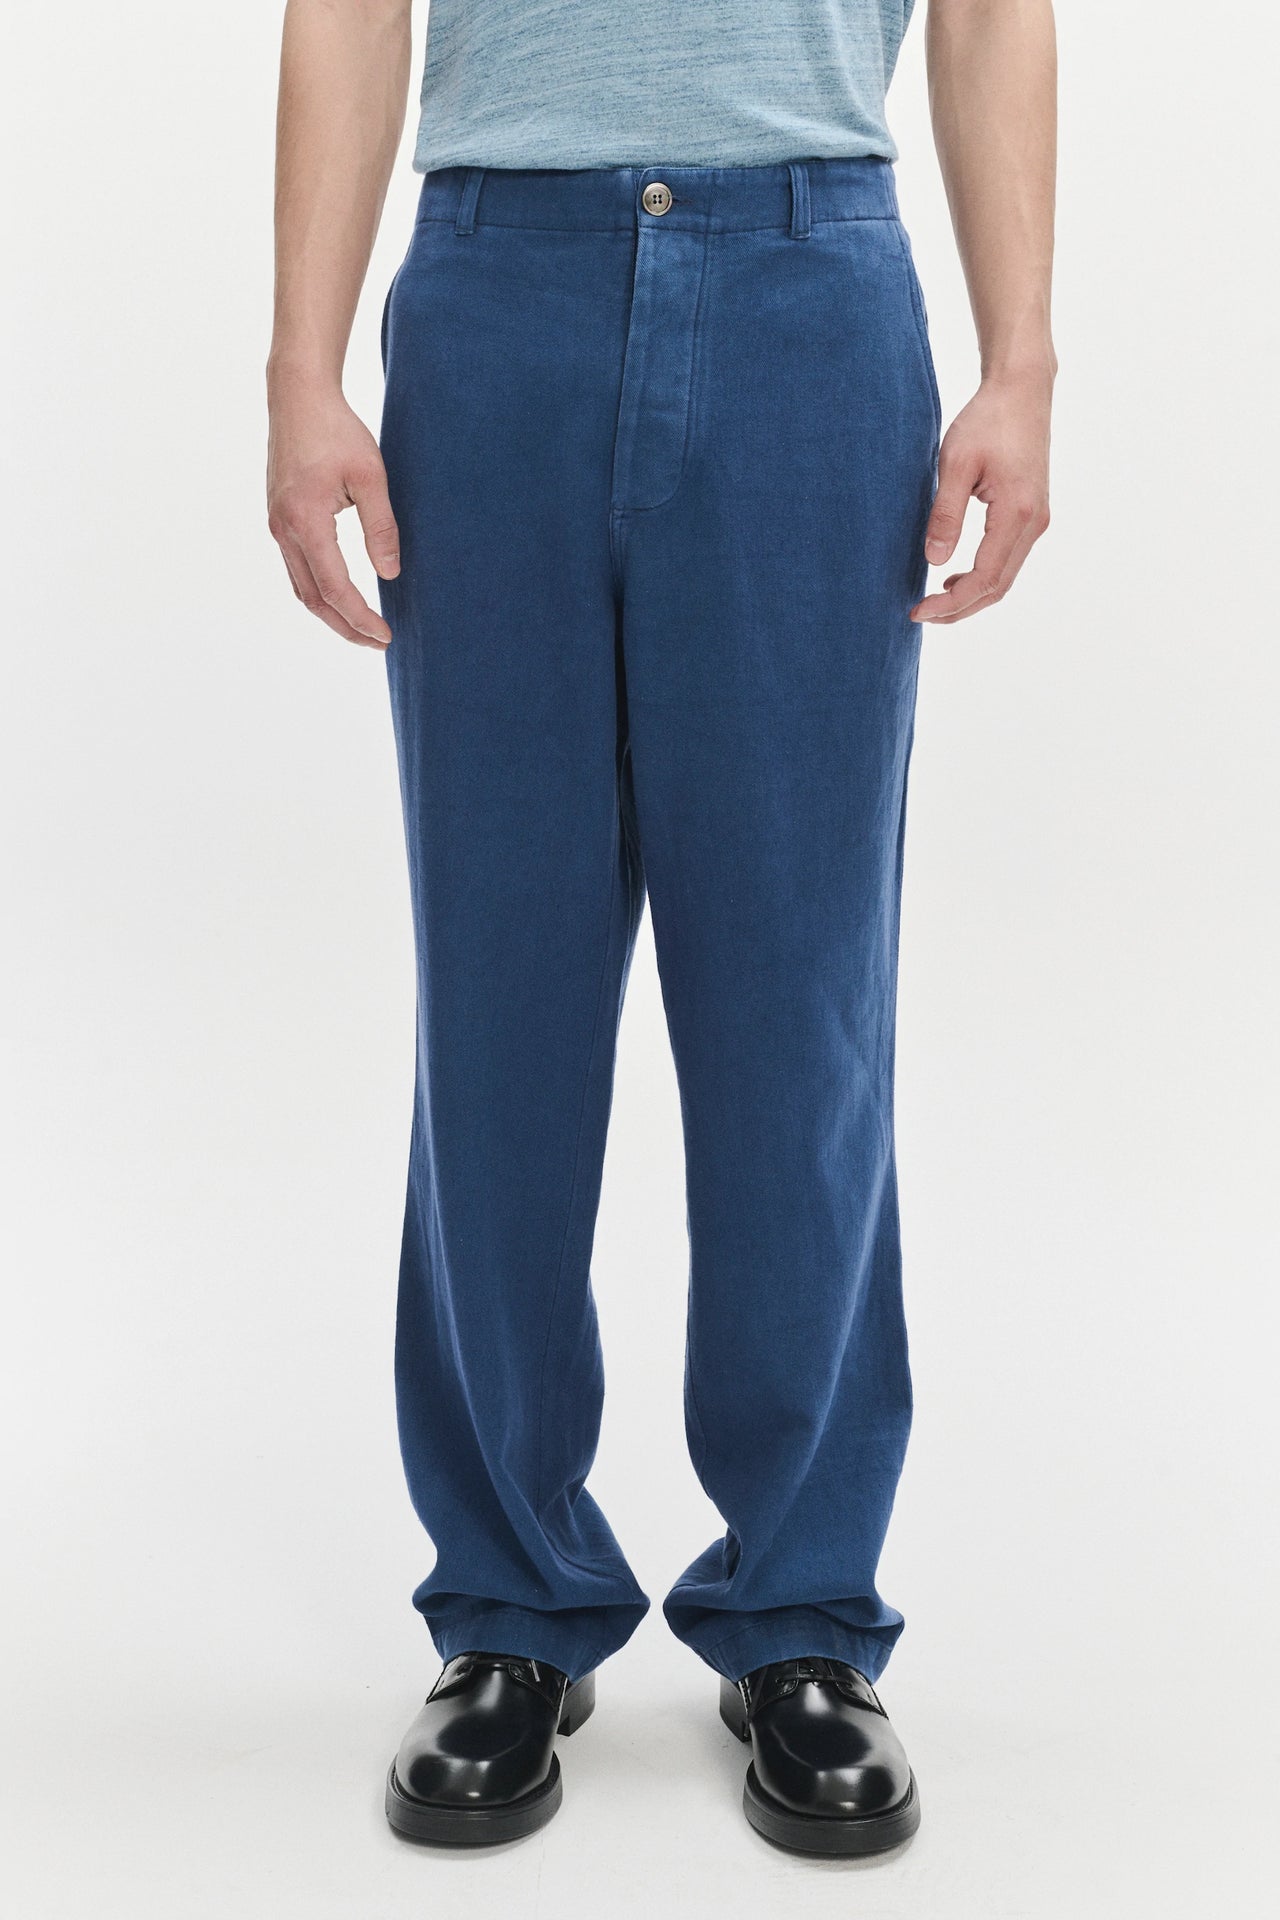 Rolling Hills Trousers in a Berlin Blue Mix of Japanese Linen and Cotton